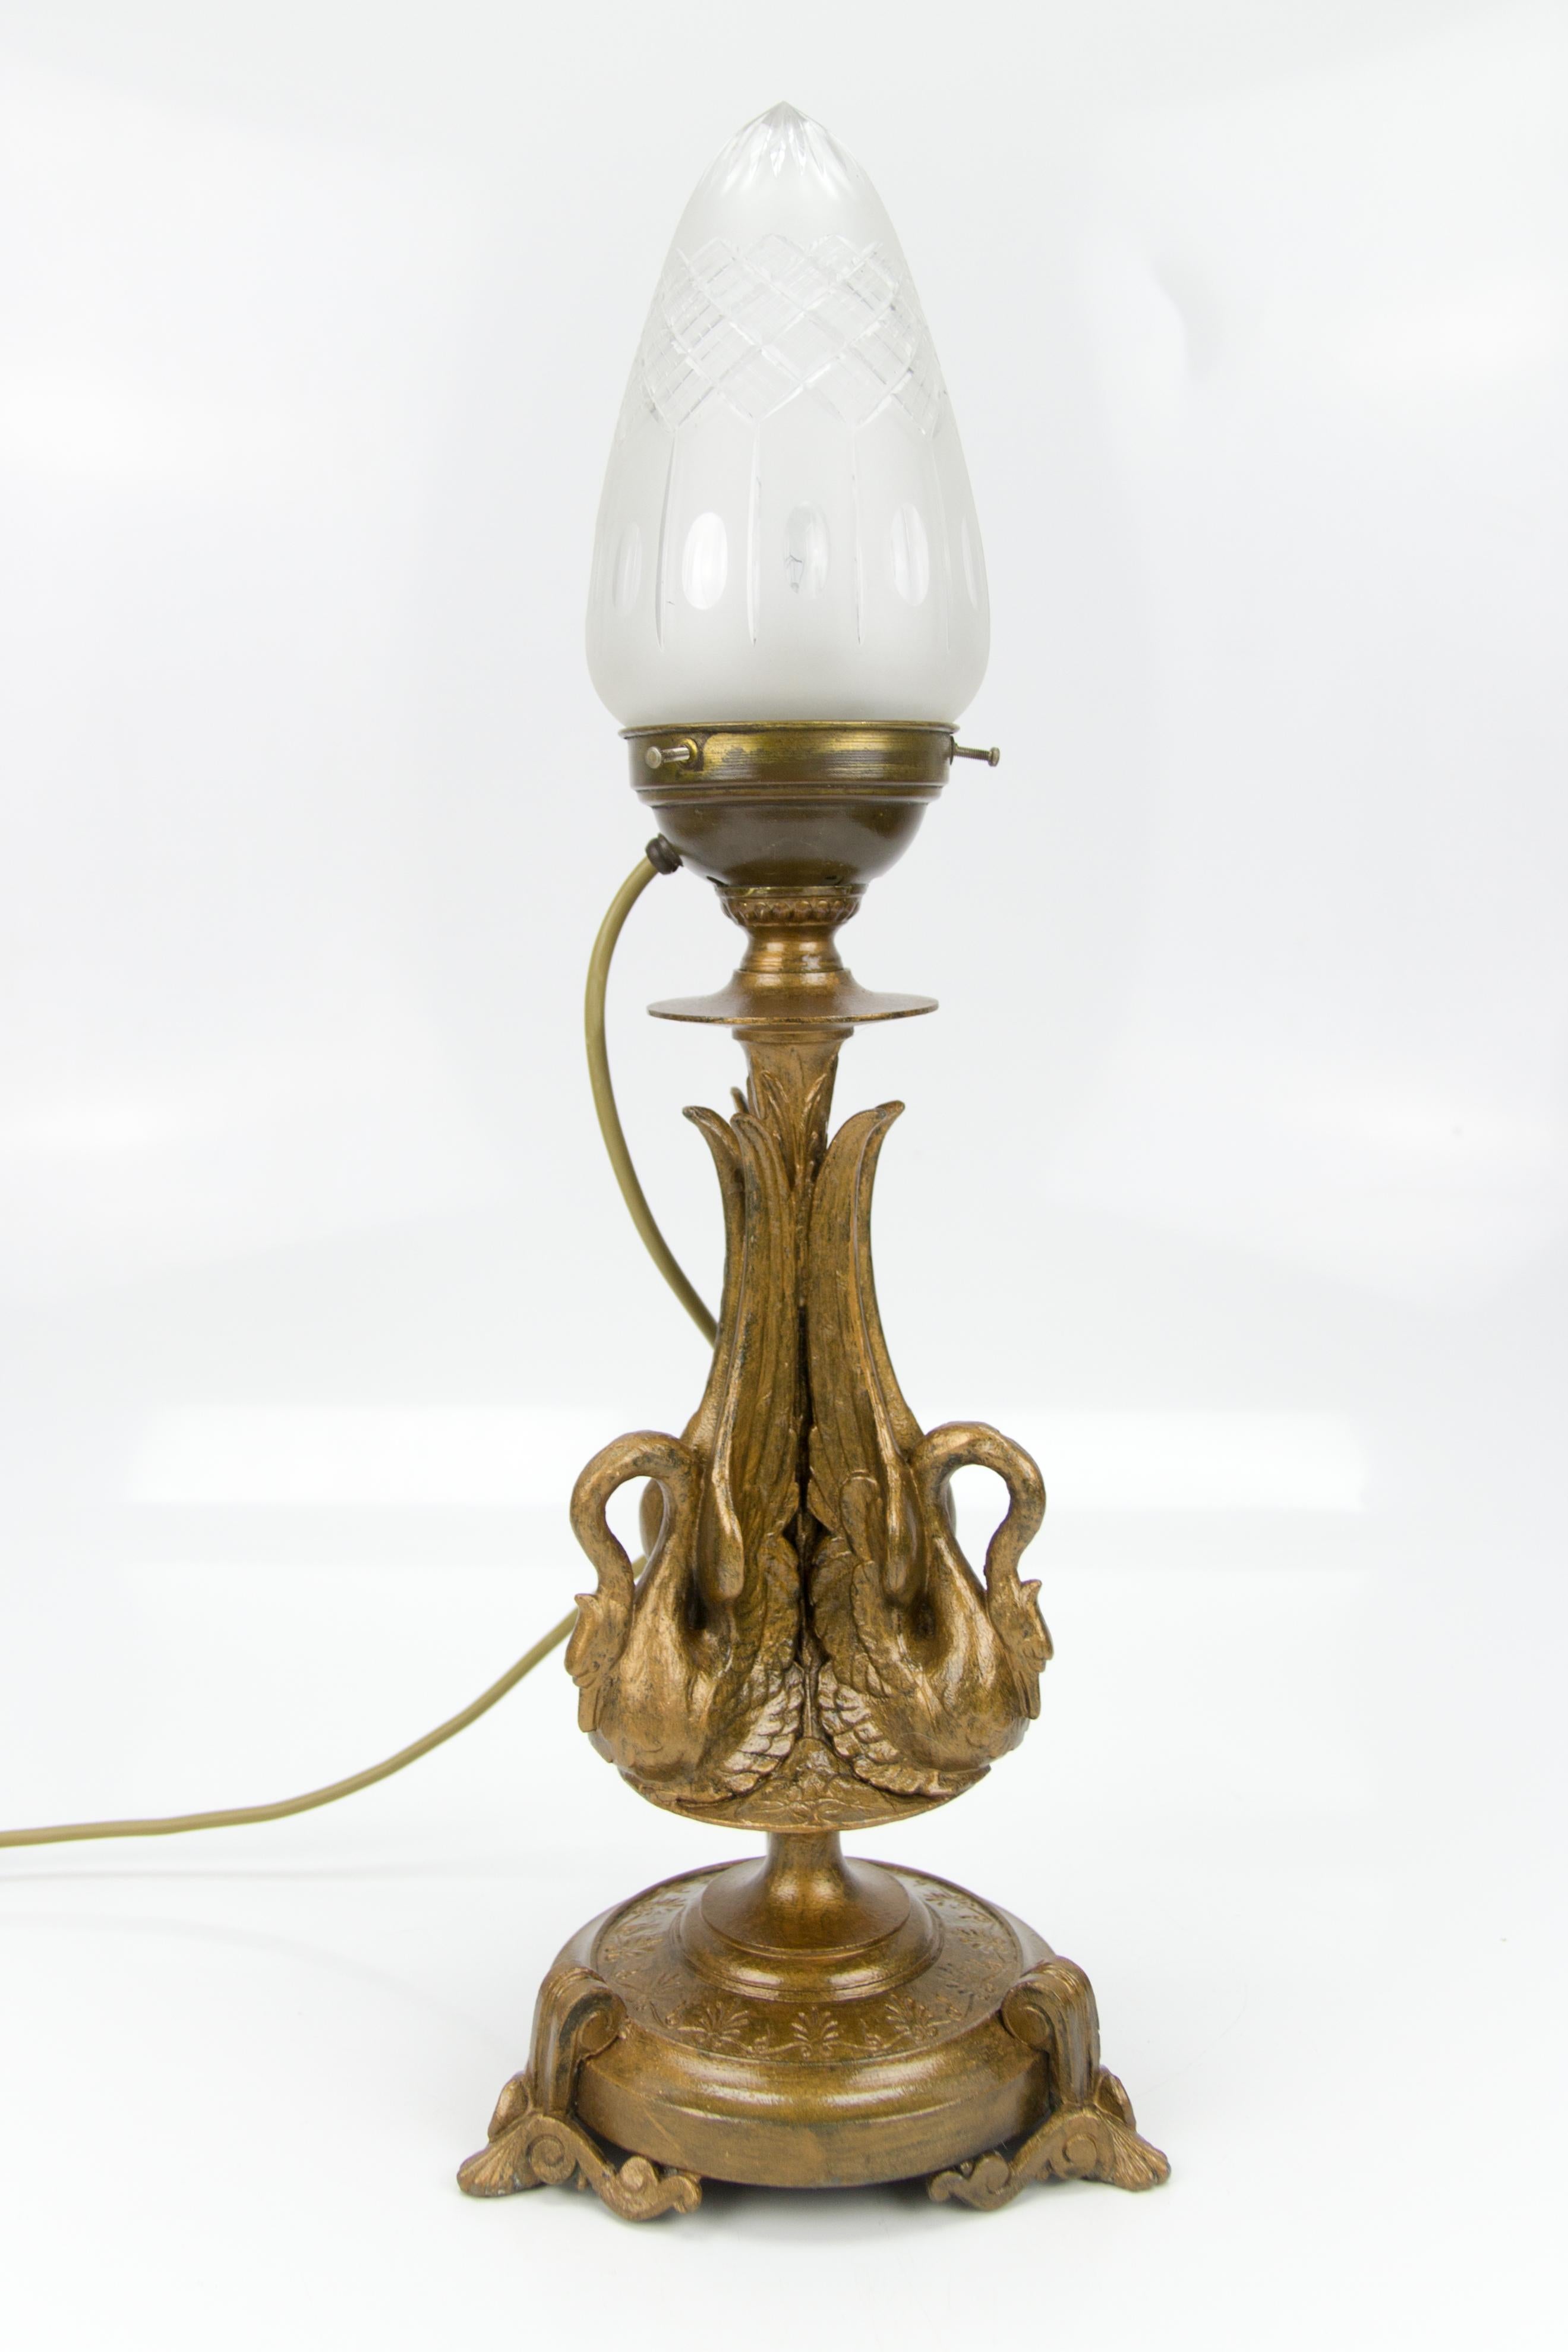 French Empire Style Bronze-Colored Pewter and Frosted Cut Glass Table Lamp 1900s For Sale 6